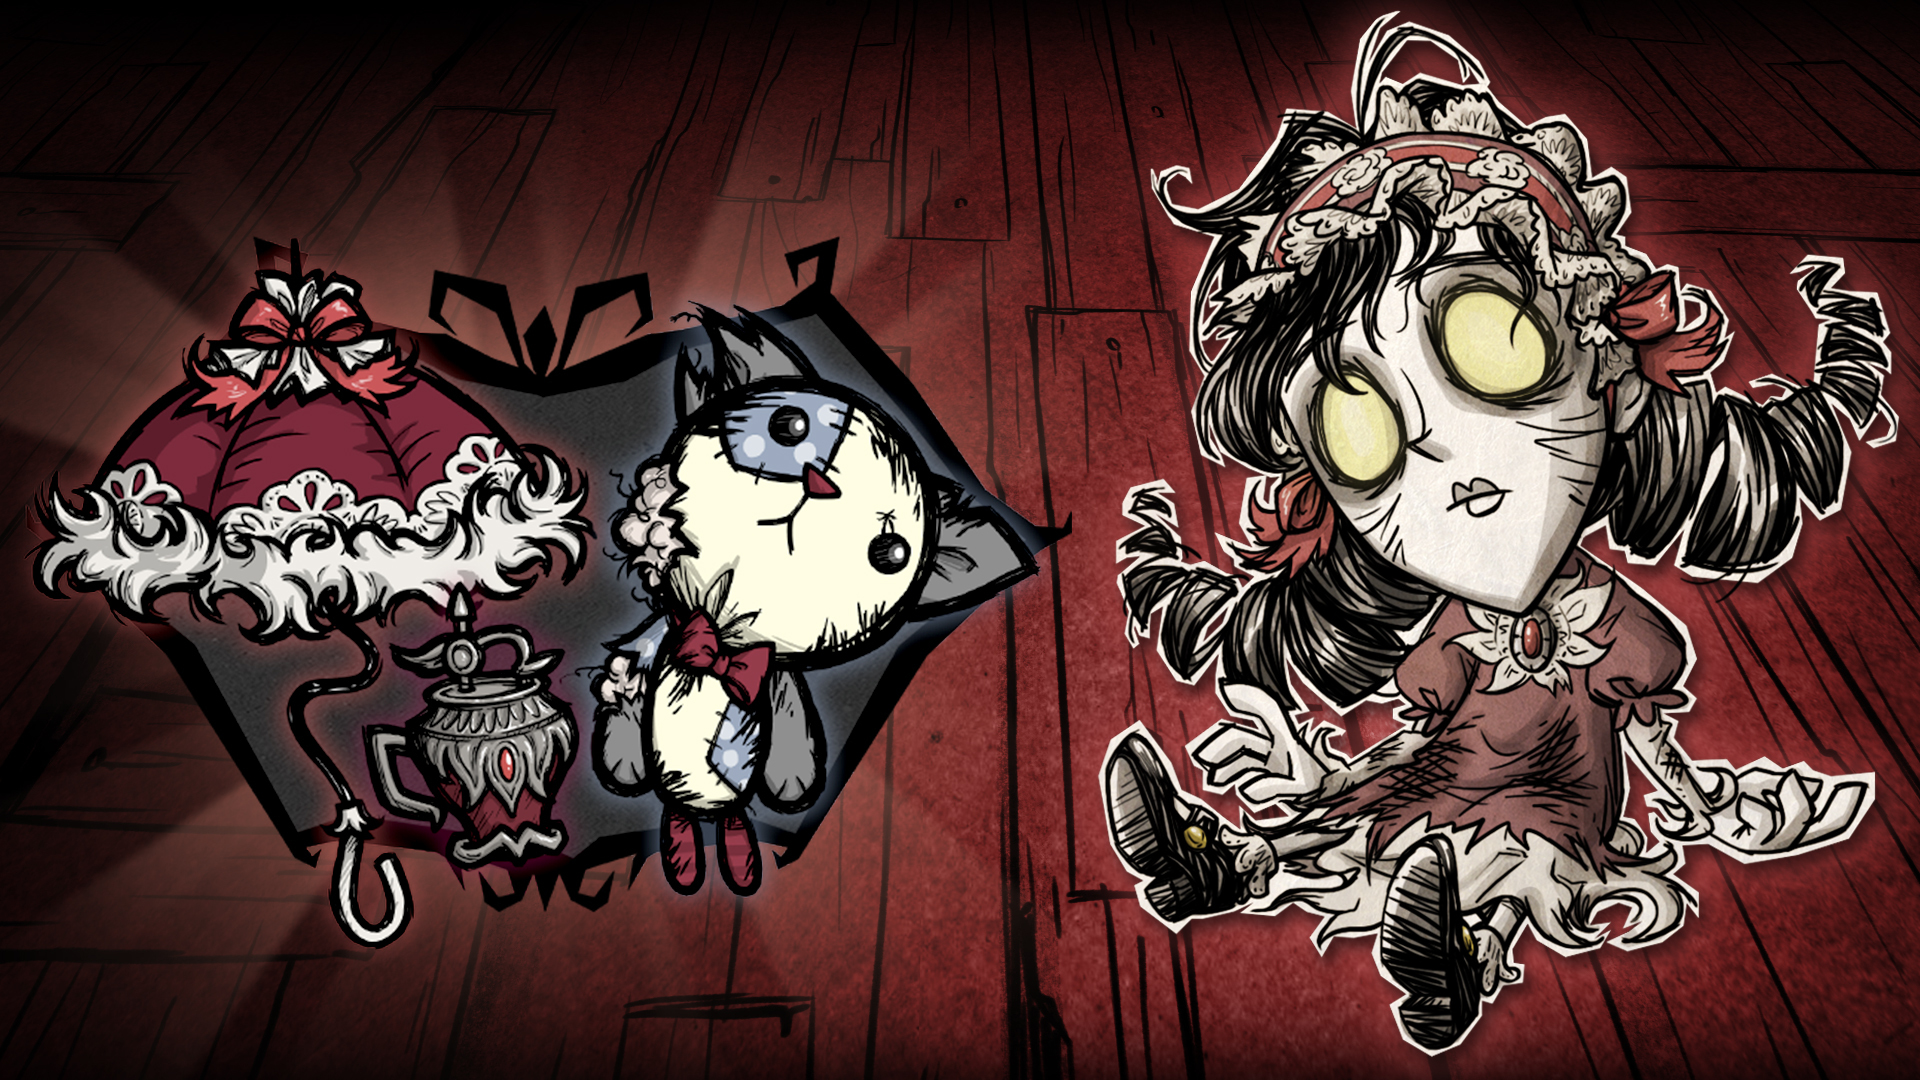 Don t start new. Донт старв. Уиллоу don't Starve. Донт старв персонажи. Уилсон ДСТ.